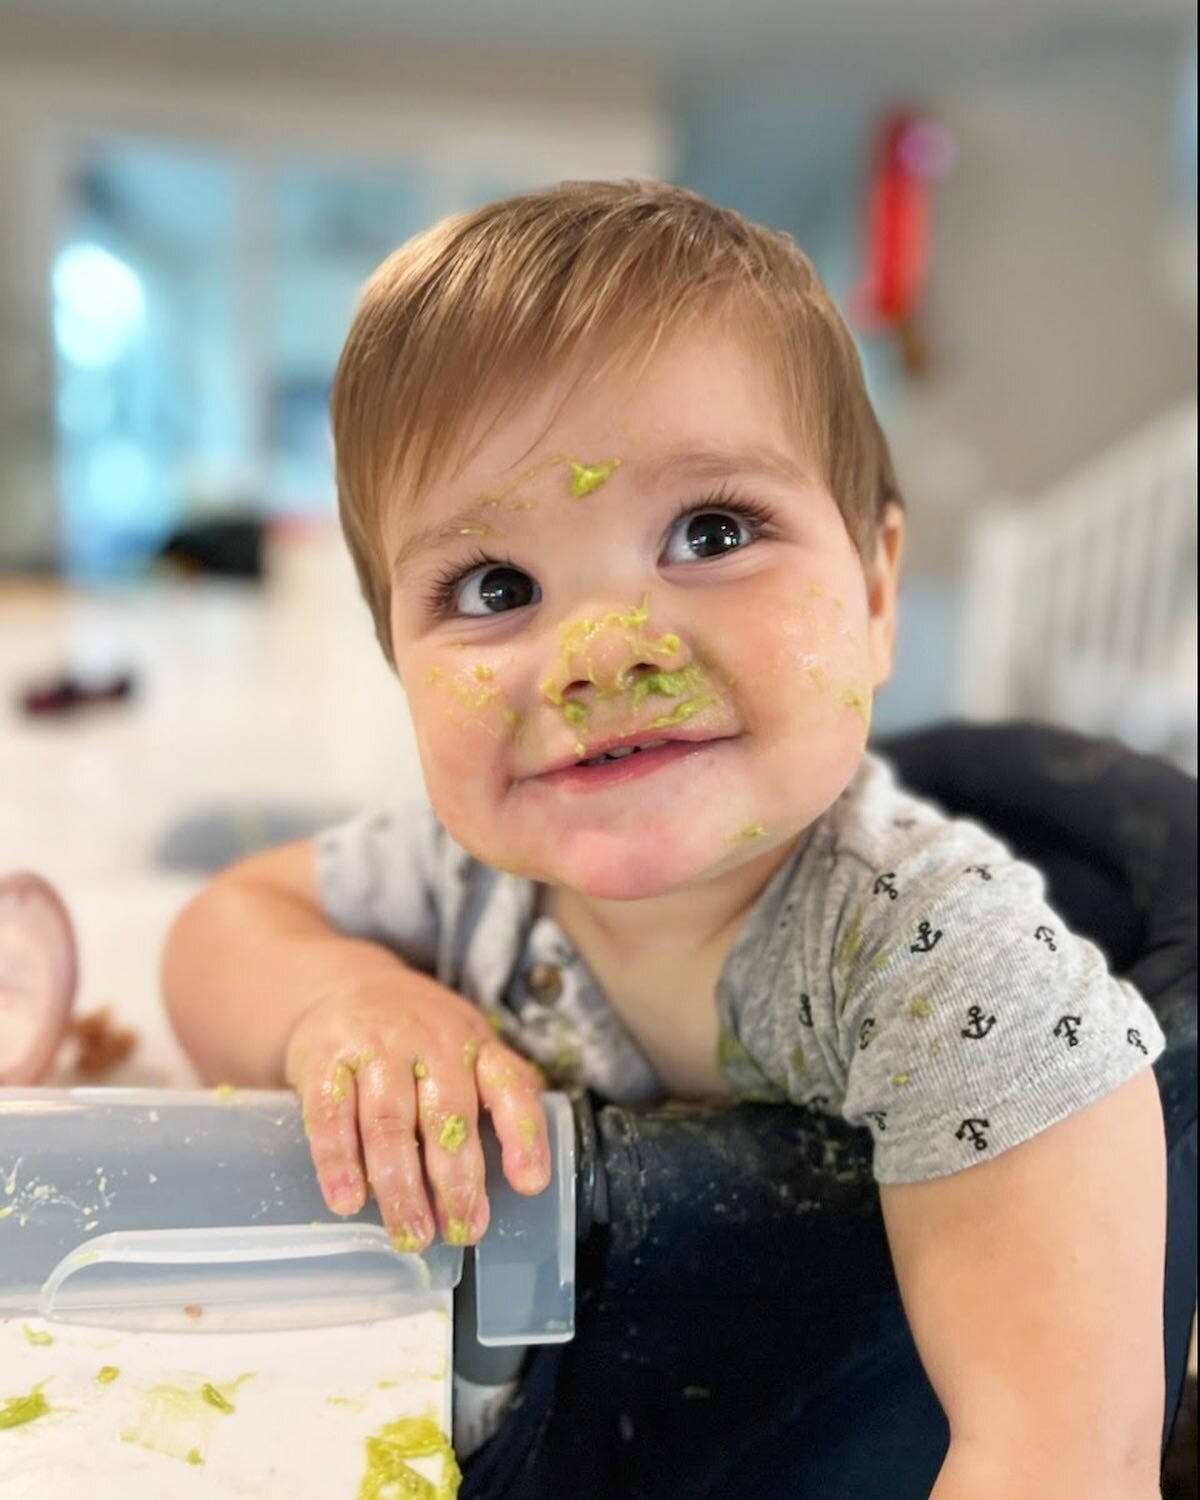 So rewarding to get photos like this from parents! 🥰 Love when the babies I see grow up to LOVE food and thrive 🥑

#foodlove #tetheredoraltissues #tonguetie #liptie #oralmotortherapy #occupationaltherapy #pediatricot #tonguetiesupport #parentsuppor